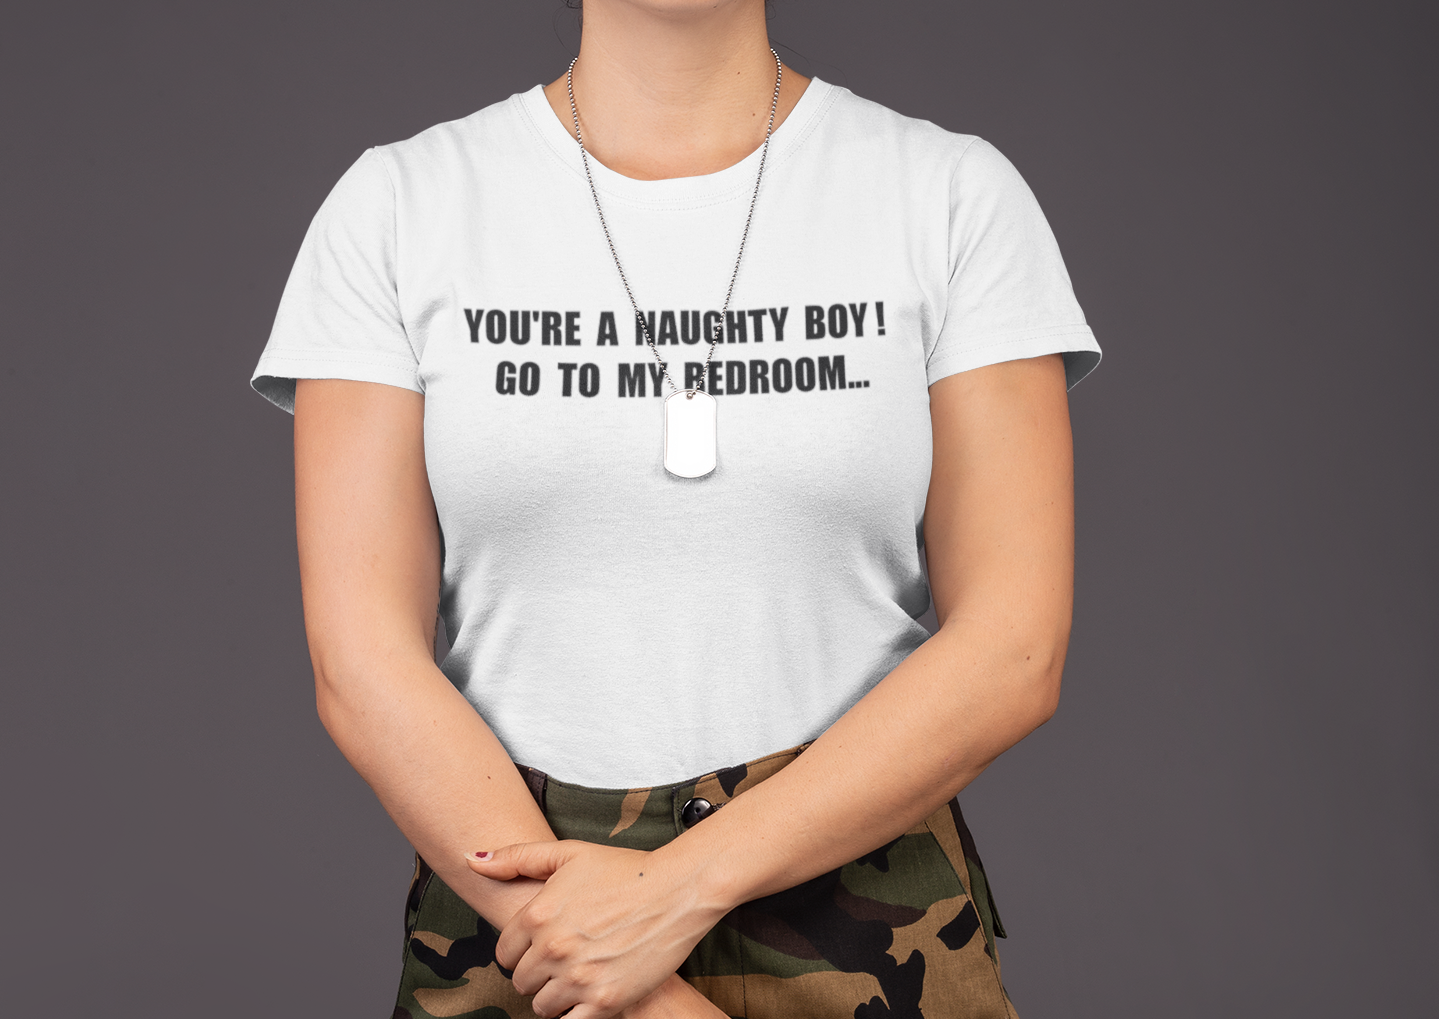 You're a naughty boy!Go to my bedroom T-shirt - Urbantshirts.co.uk